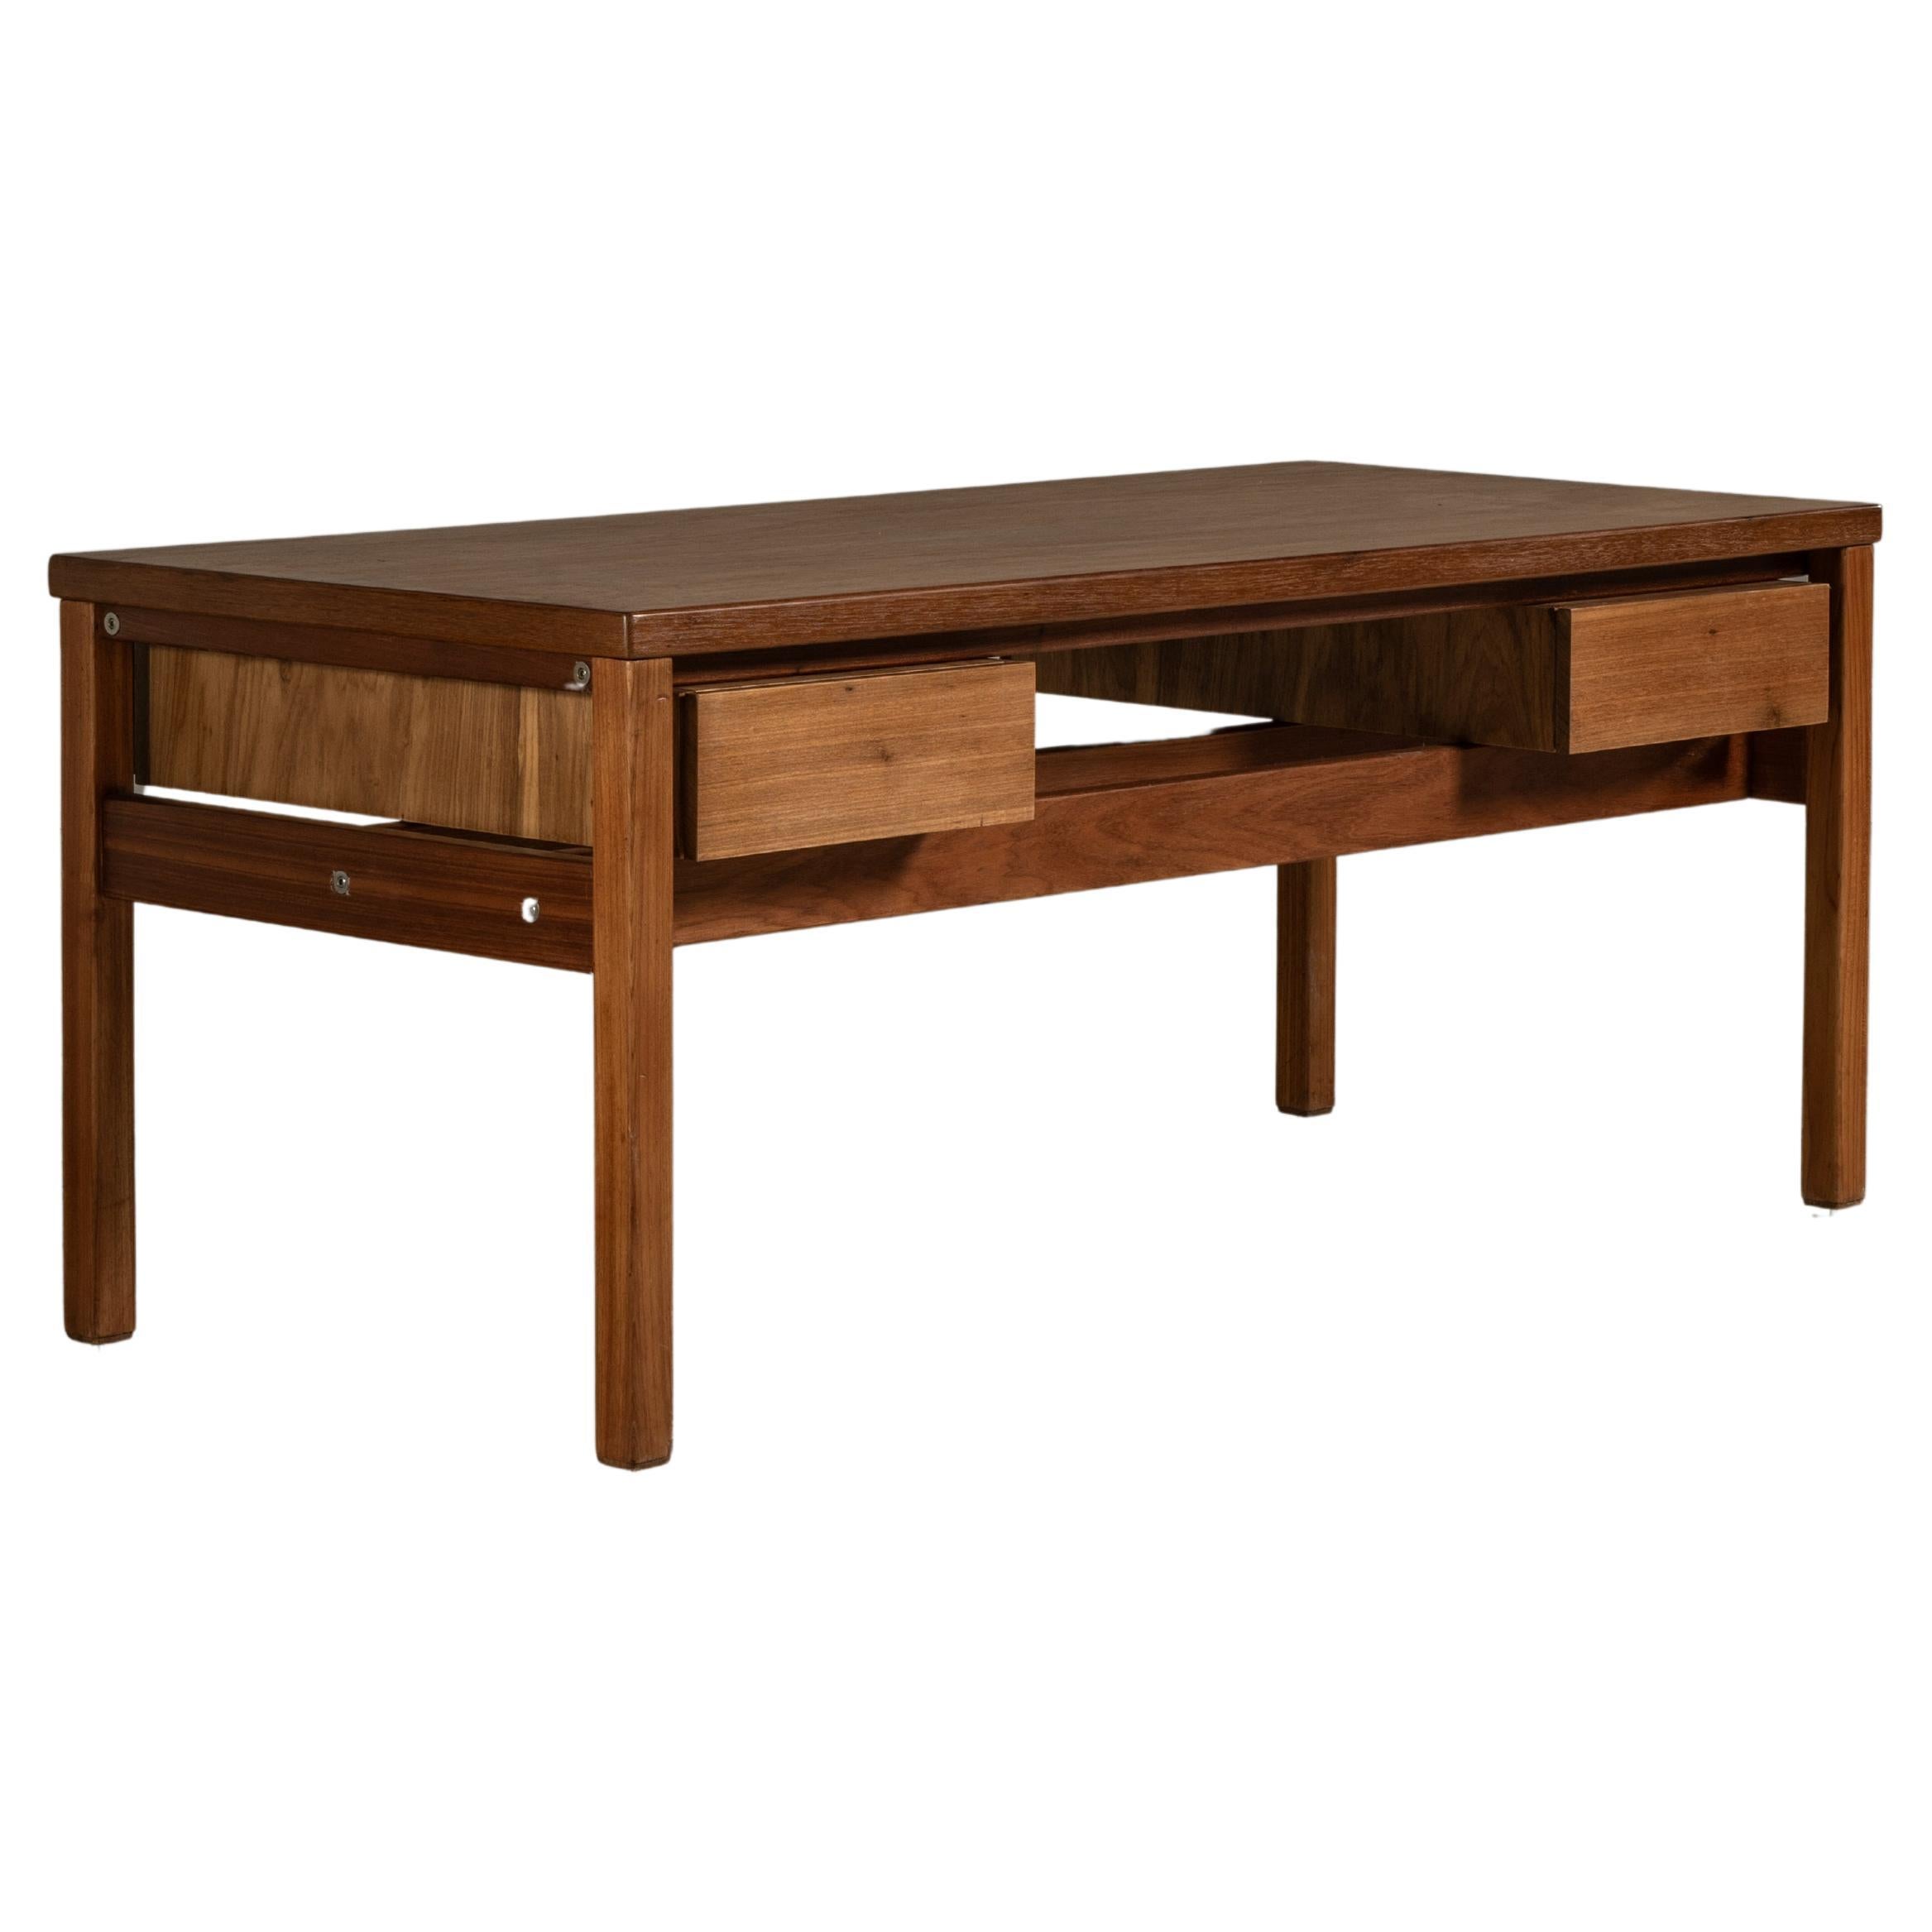 Desk in Solid Hardwood, by Sergio Rodrigues, Brazilian Mid-Century Modern  